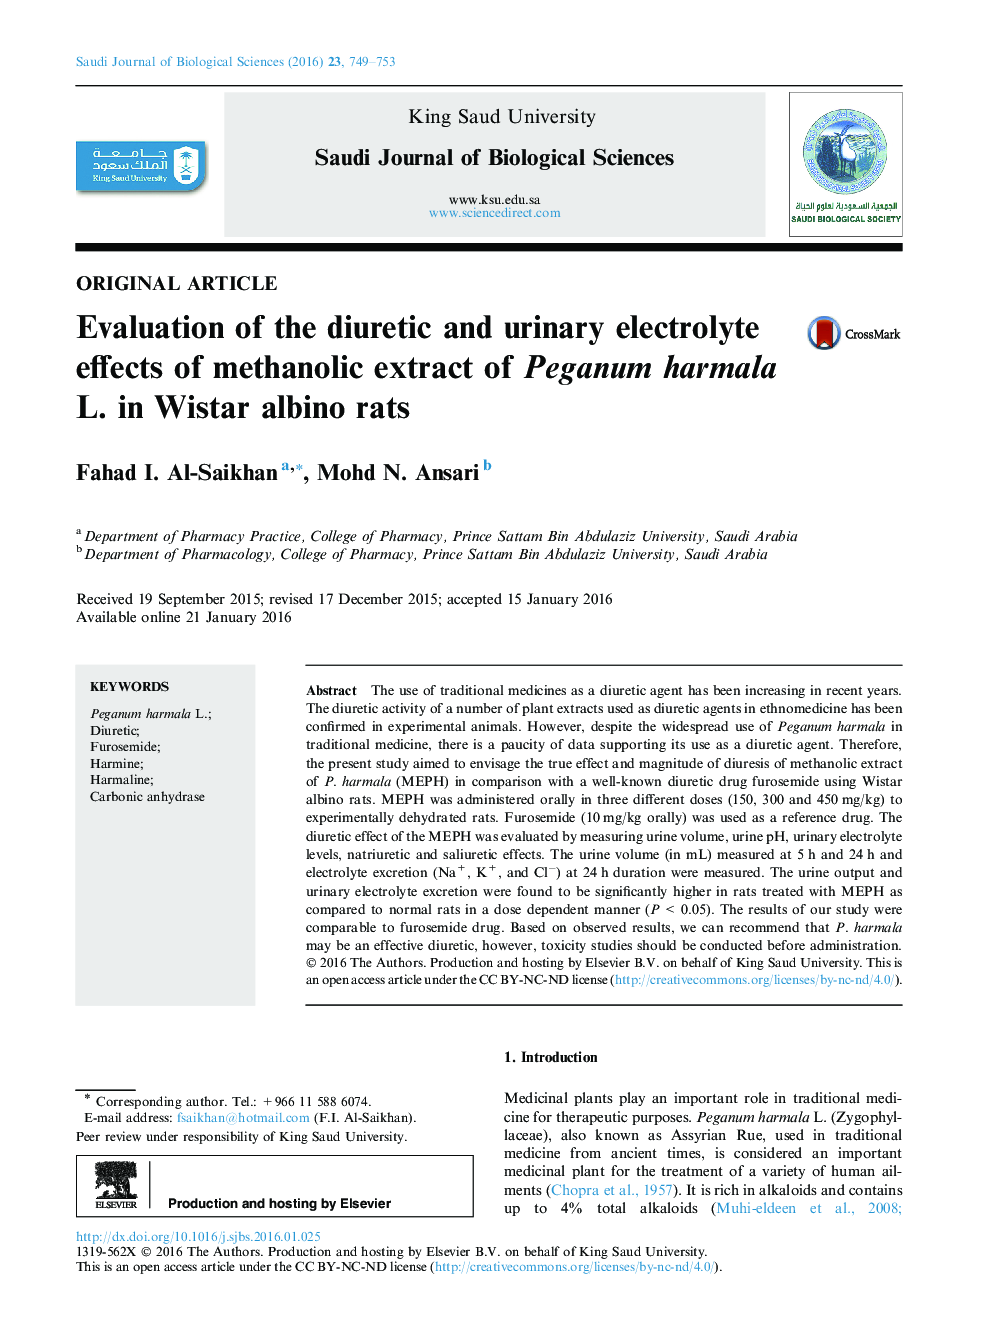 Original articleEvaluation of the diuretic and urinary electrolyte effects of methanolic extract of Peganum harmala L. in Wistar albino rats